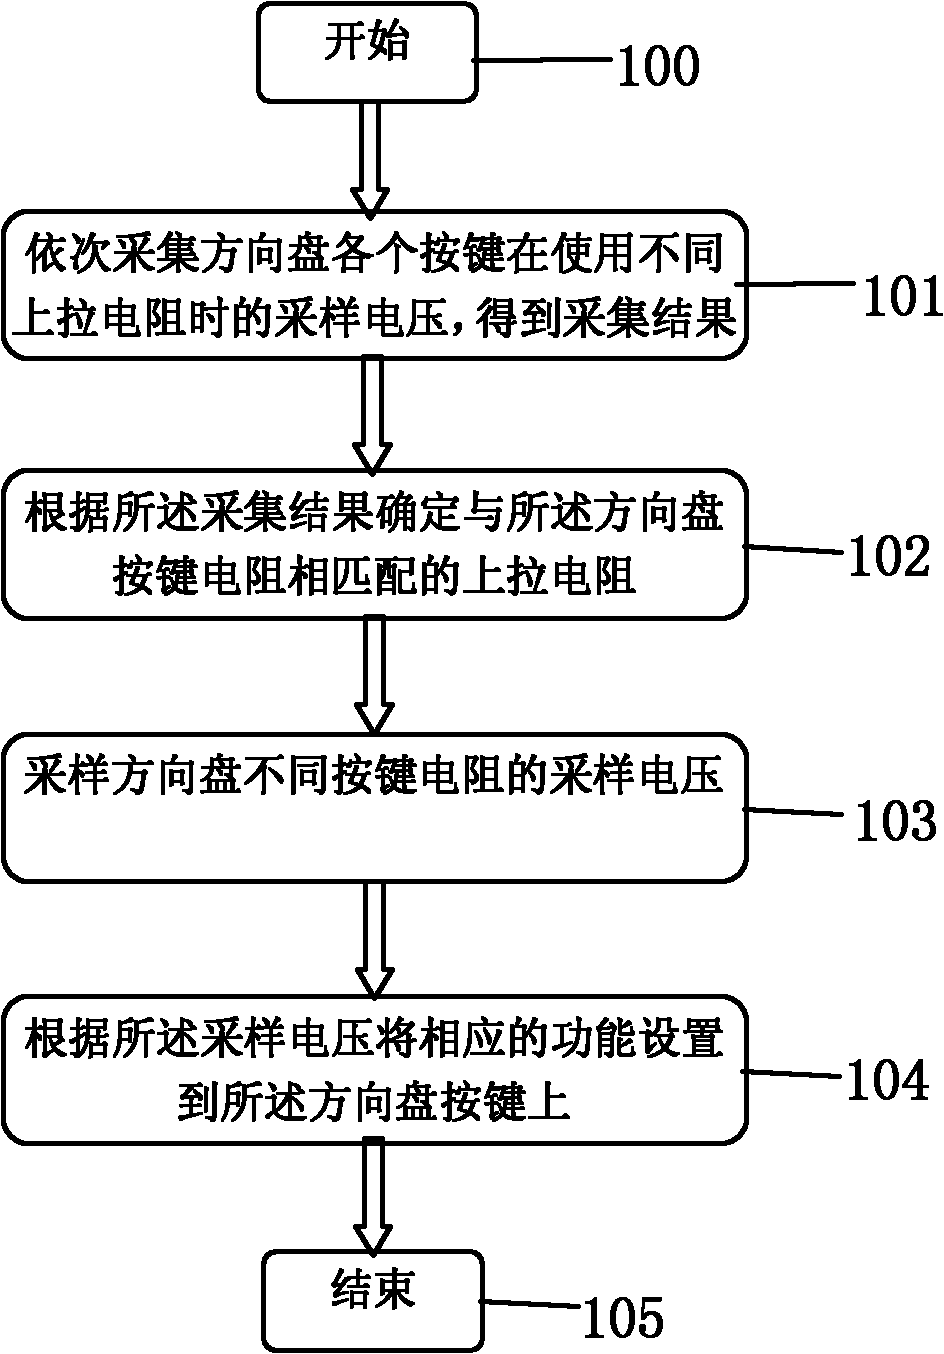 Steering wheel key function learning method and system as well as corresponding vehicular information system